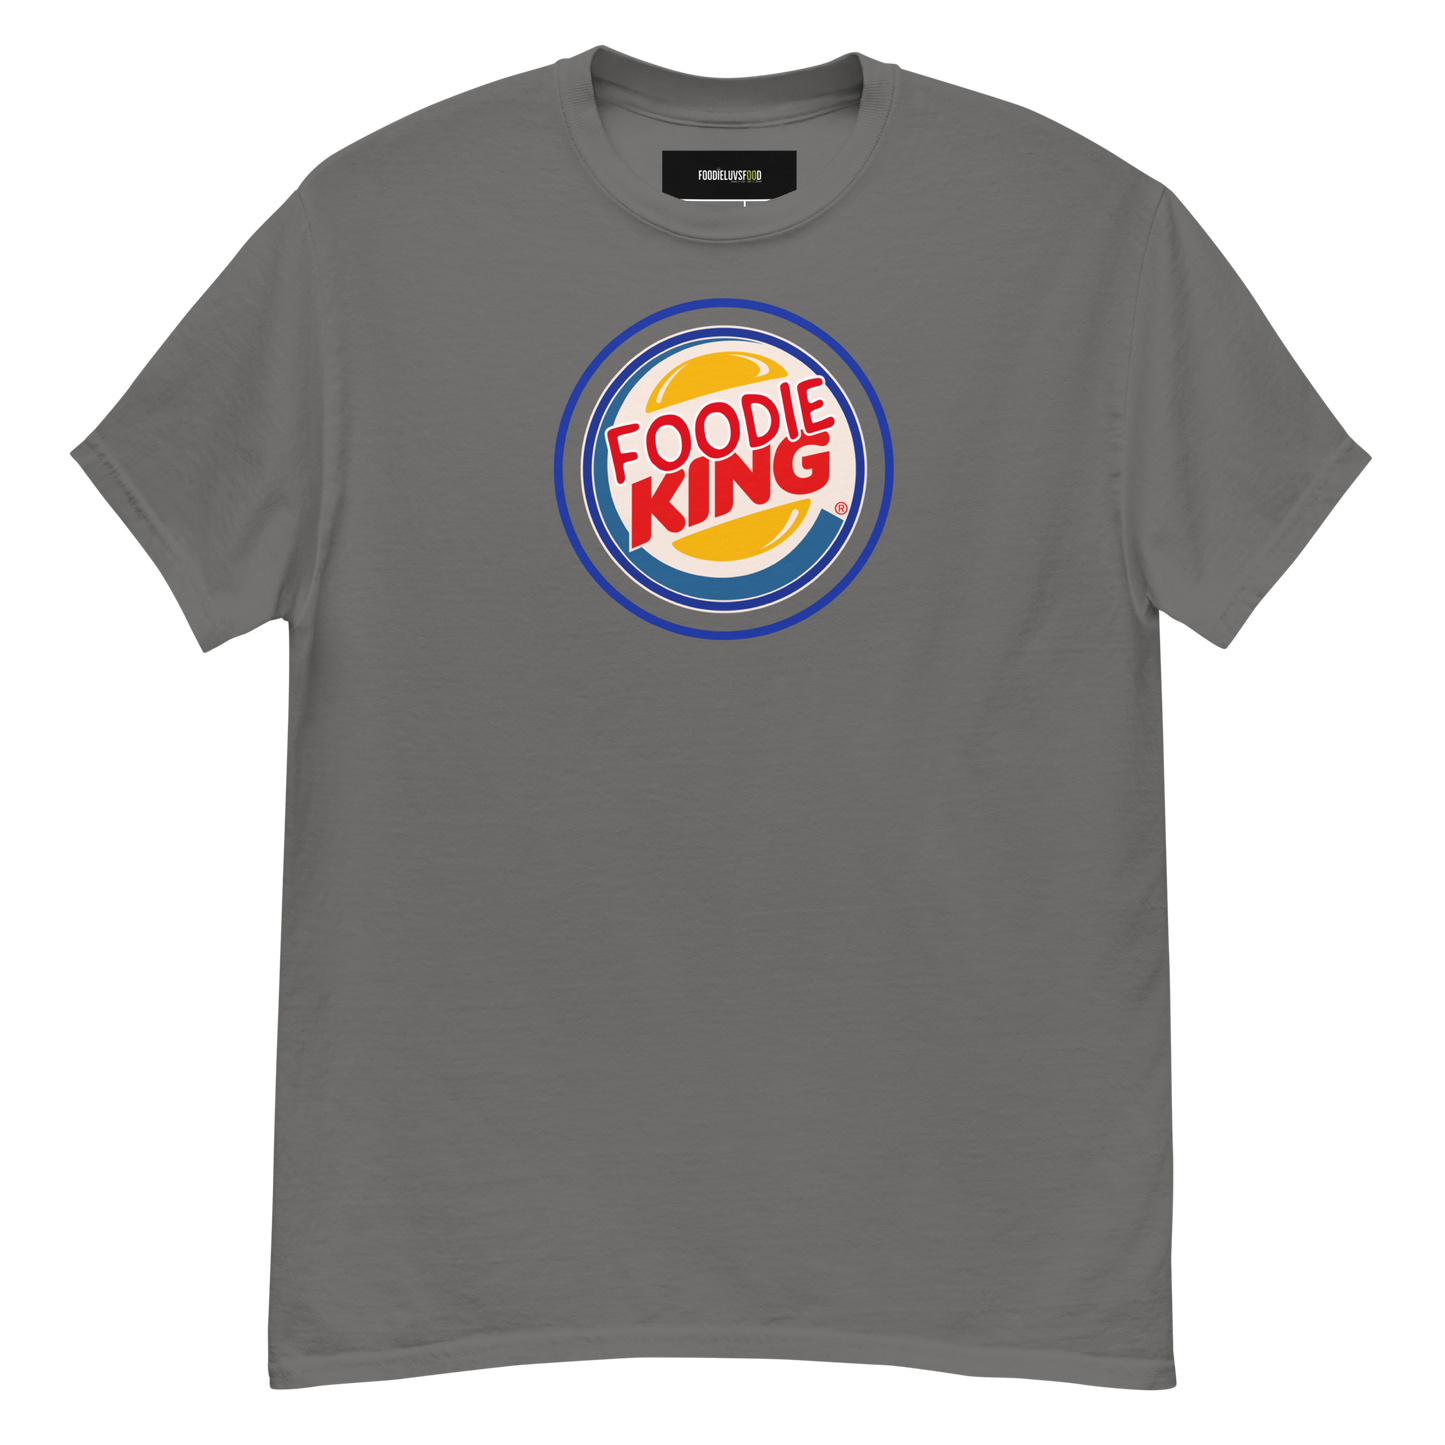 “Foodie King” Unisex Classic T-Shirt